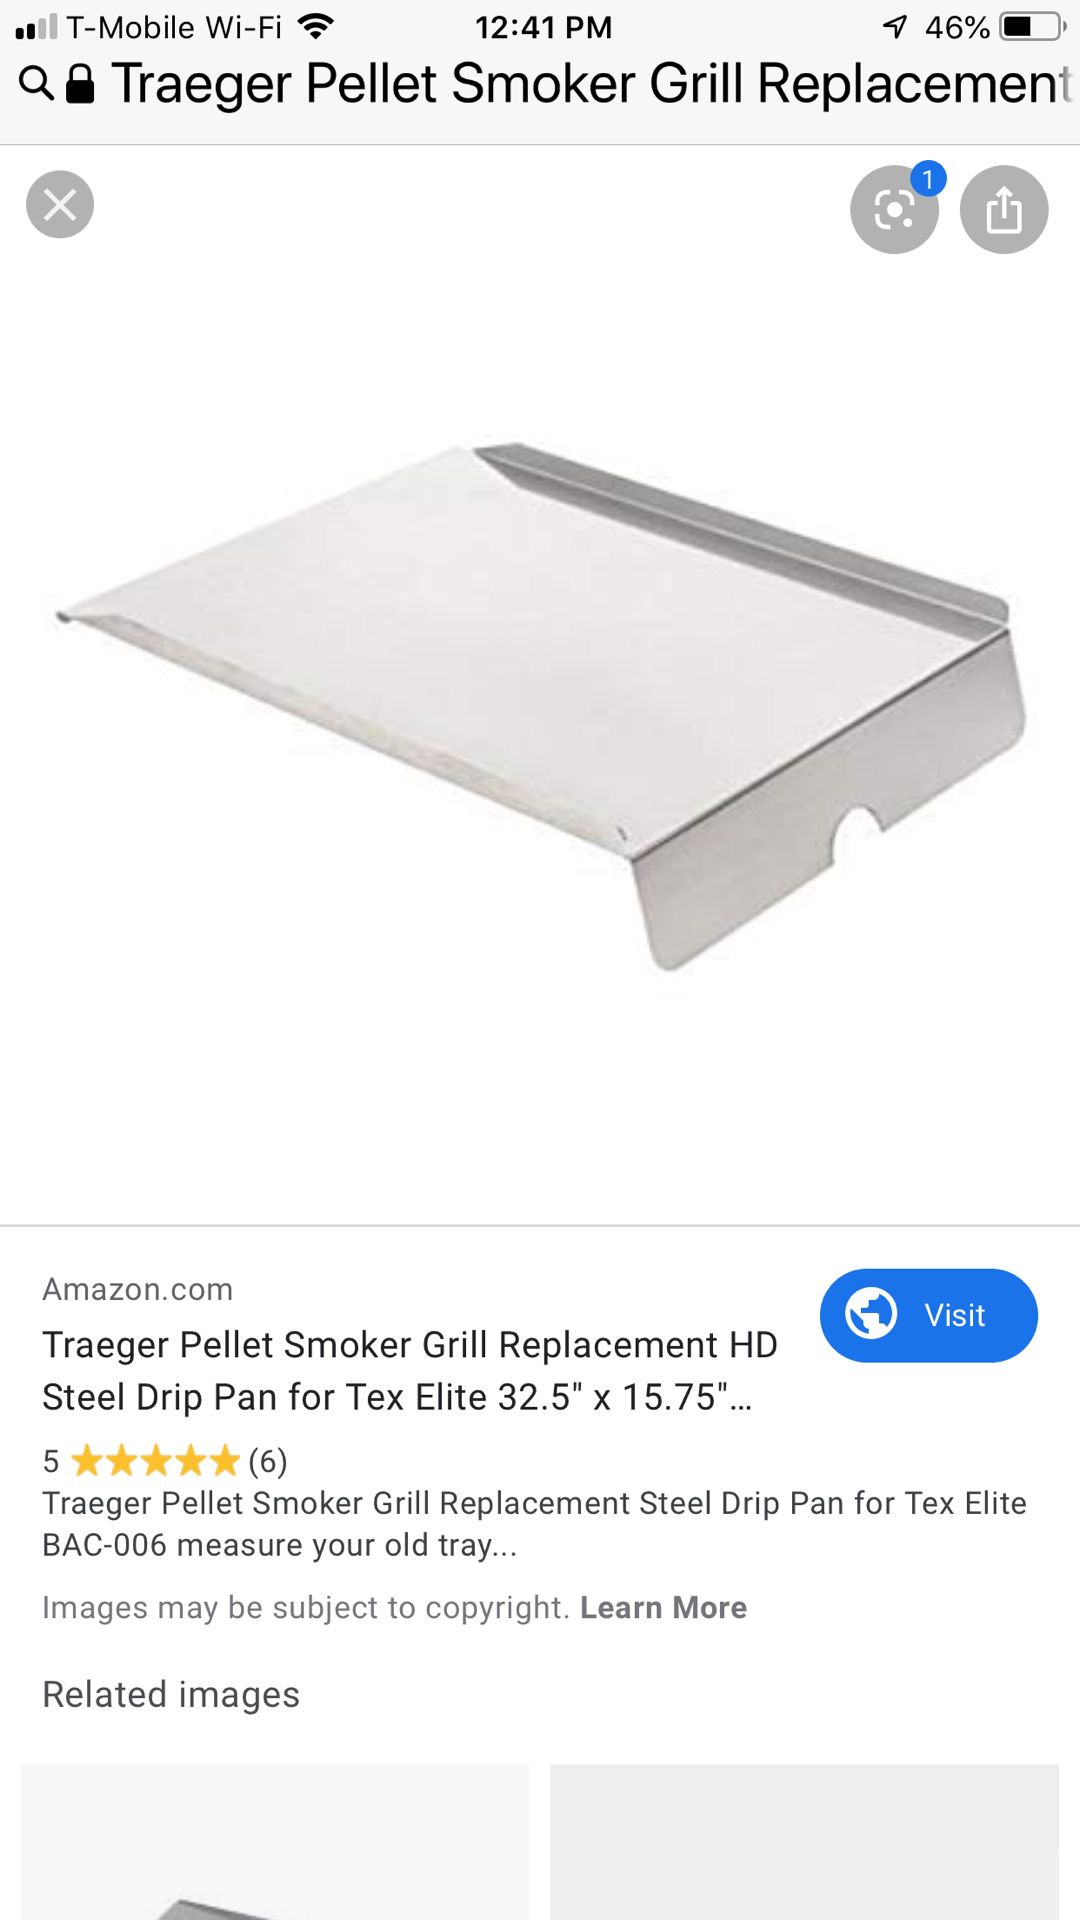 Traeger Pellet Smoker Grill Replacement HD Steel Drip Pan for Tex Elite 32.5" x 15.75" BAC-006